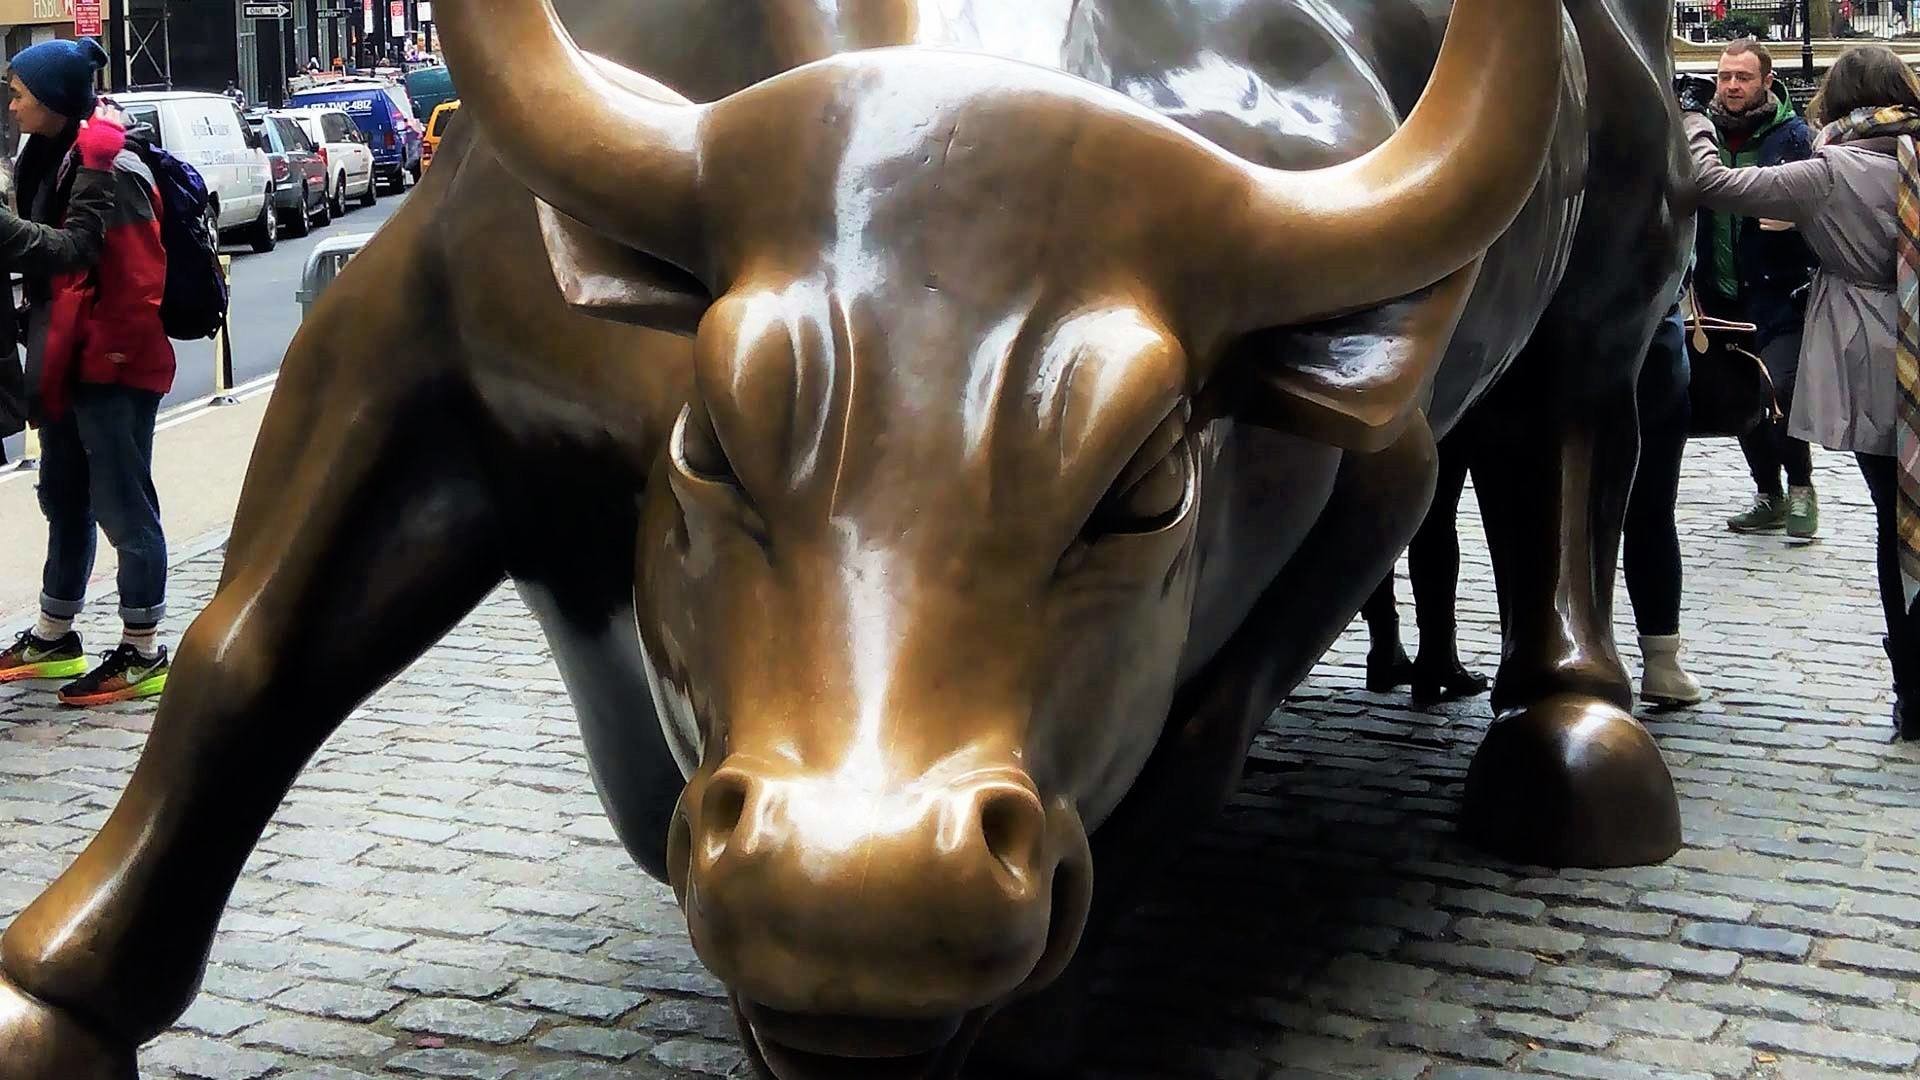 1920x1080 NYC tour in 1 day - Wall Street Bull